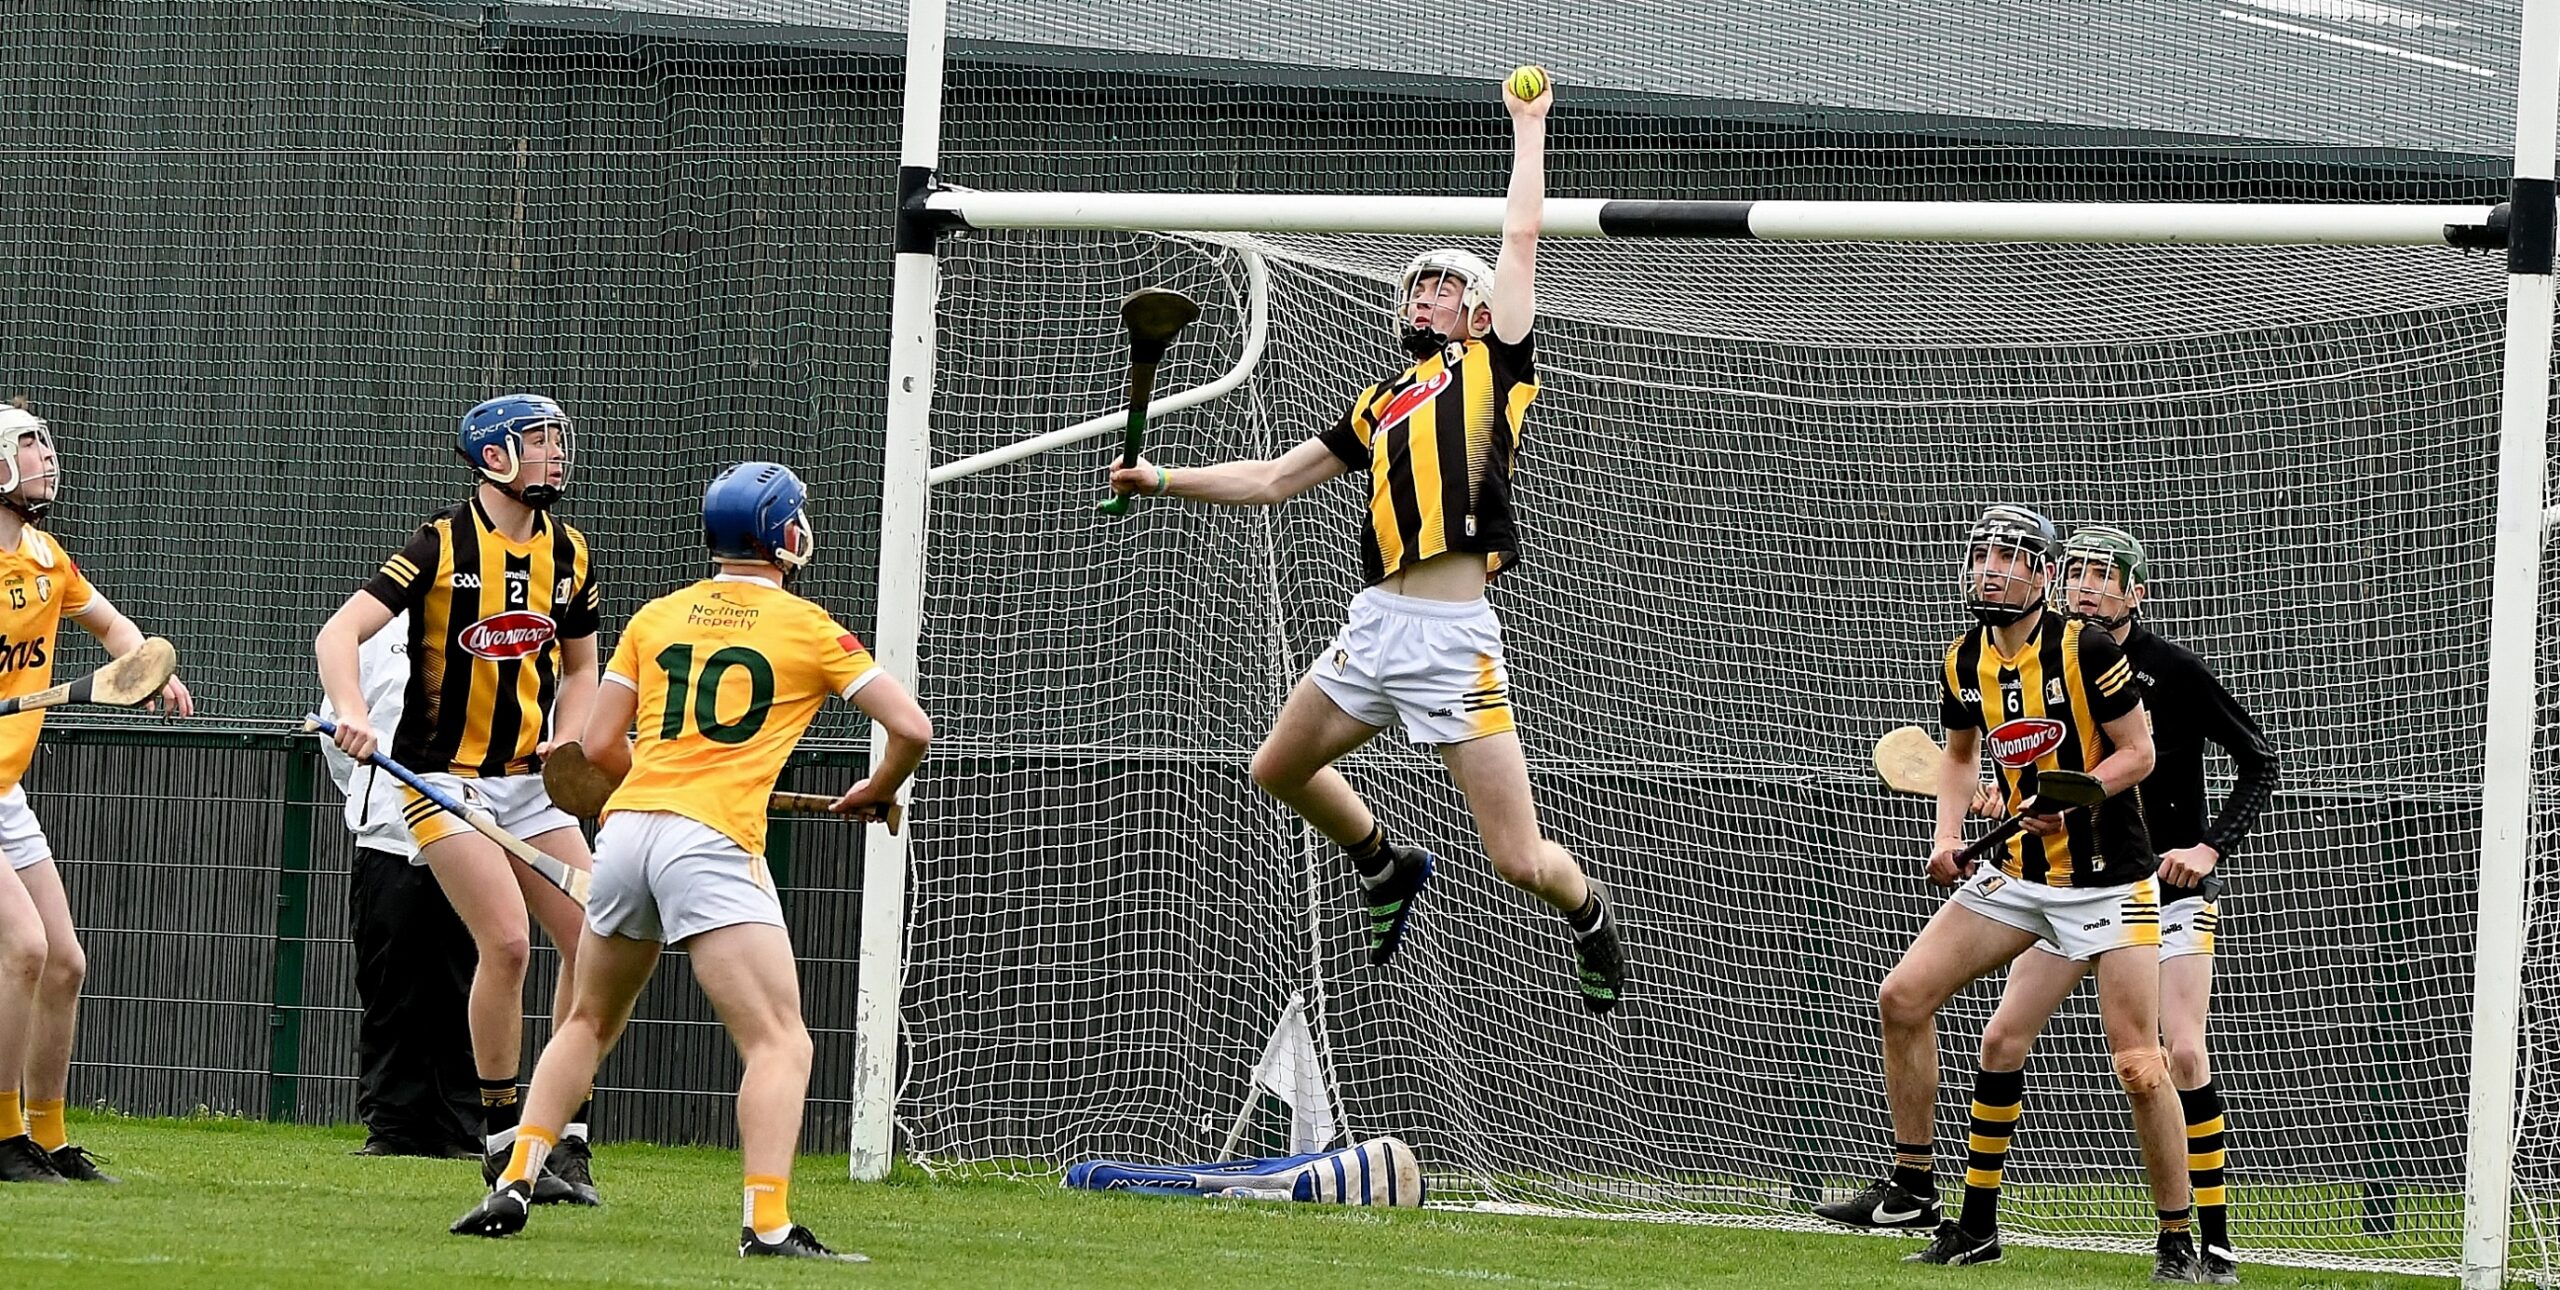 Kilkenny Minors make it 2 for 2 in the Electric Ireland Leinster MHC